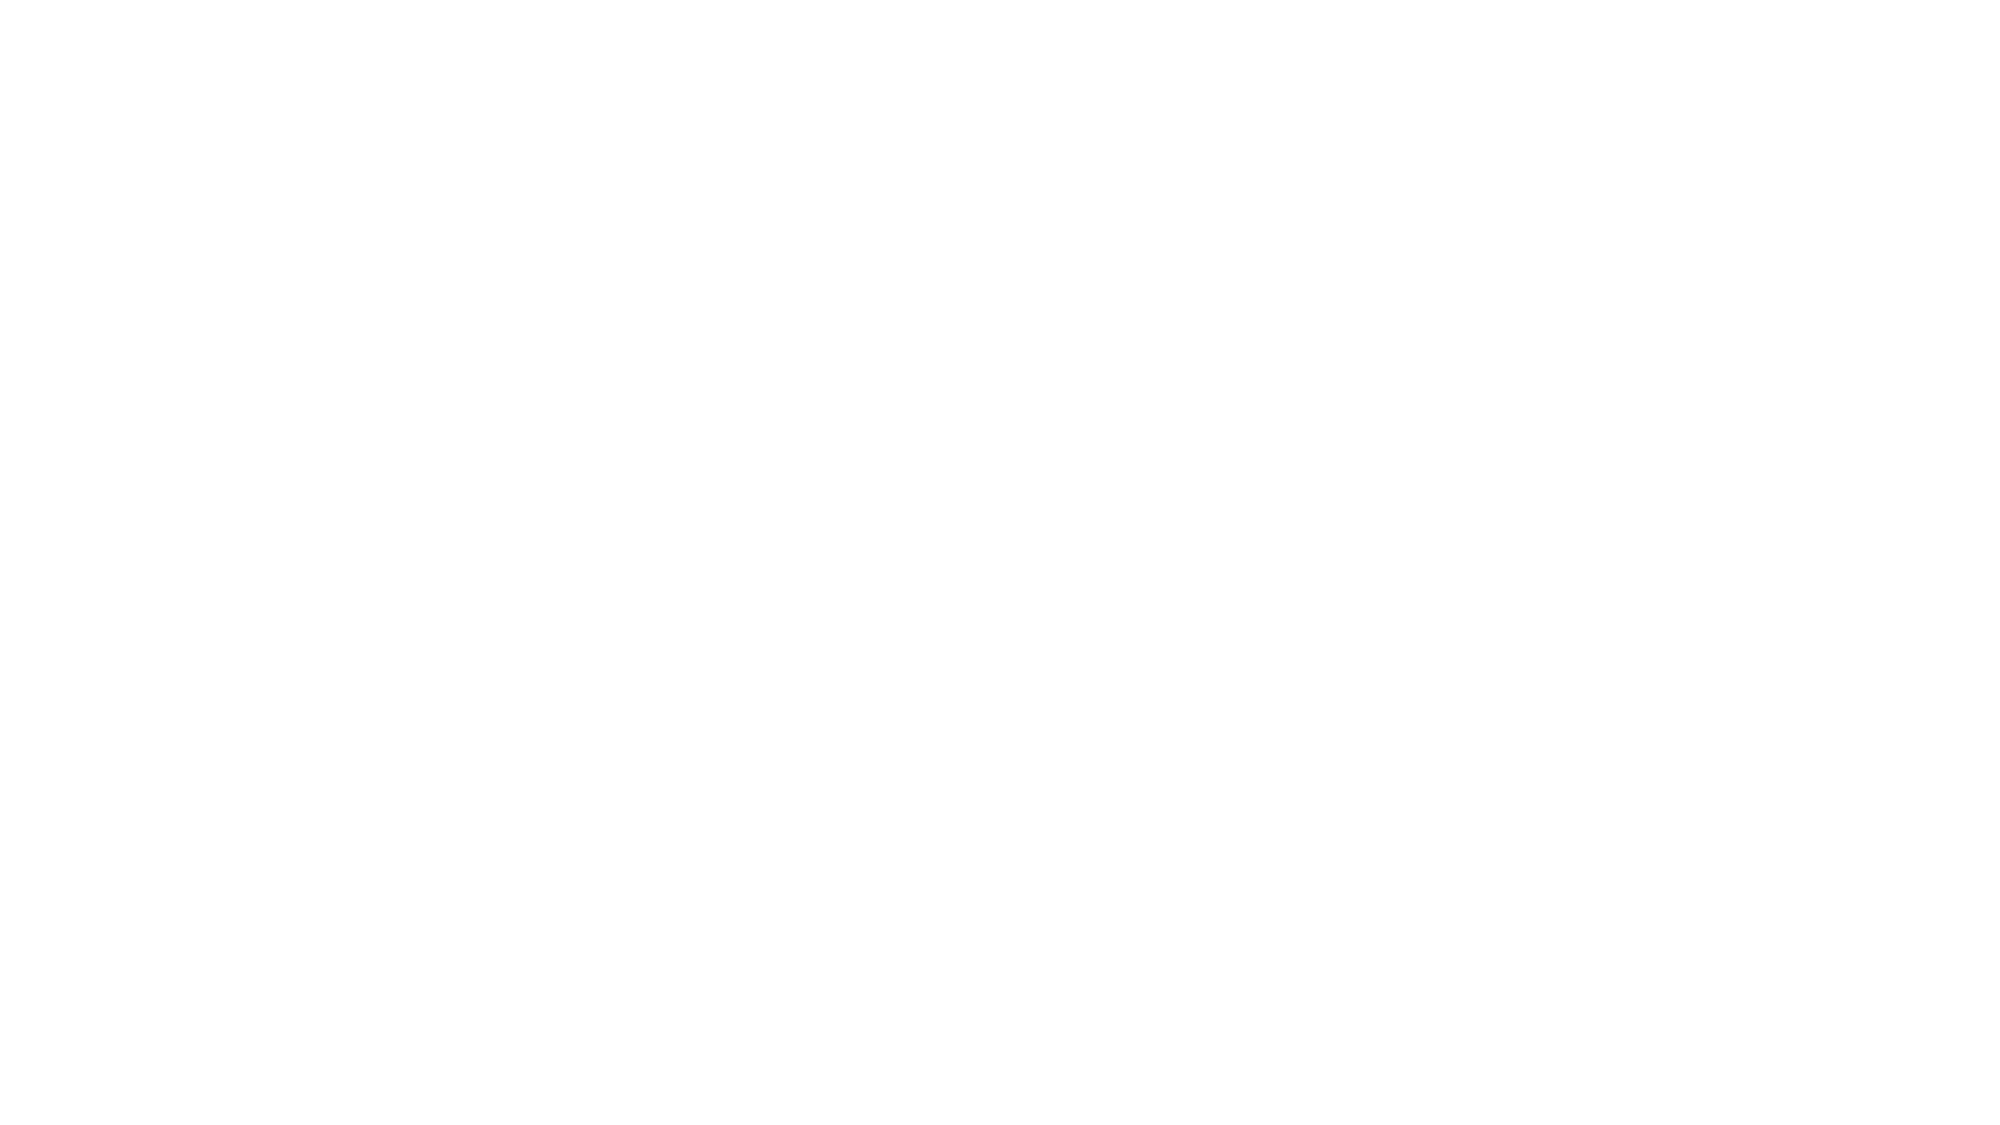 Crafting the characters for Vampire: The Masquerade - Coteries of New York  - Drawdistance - Game Developer